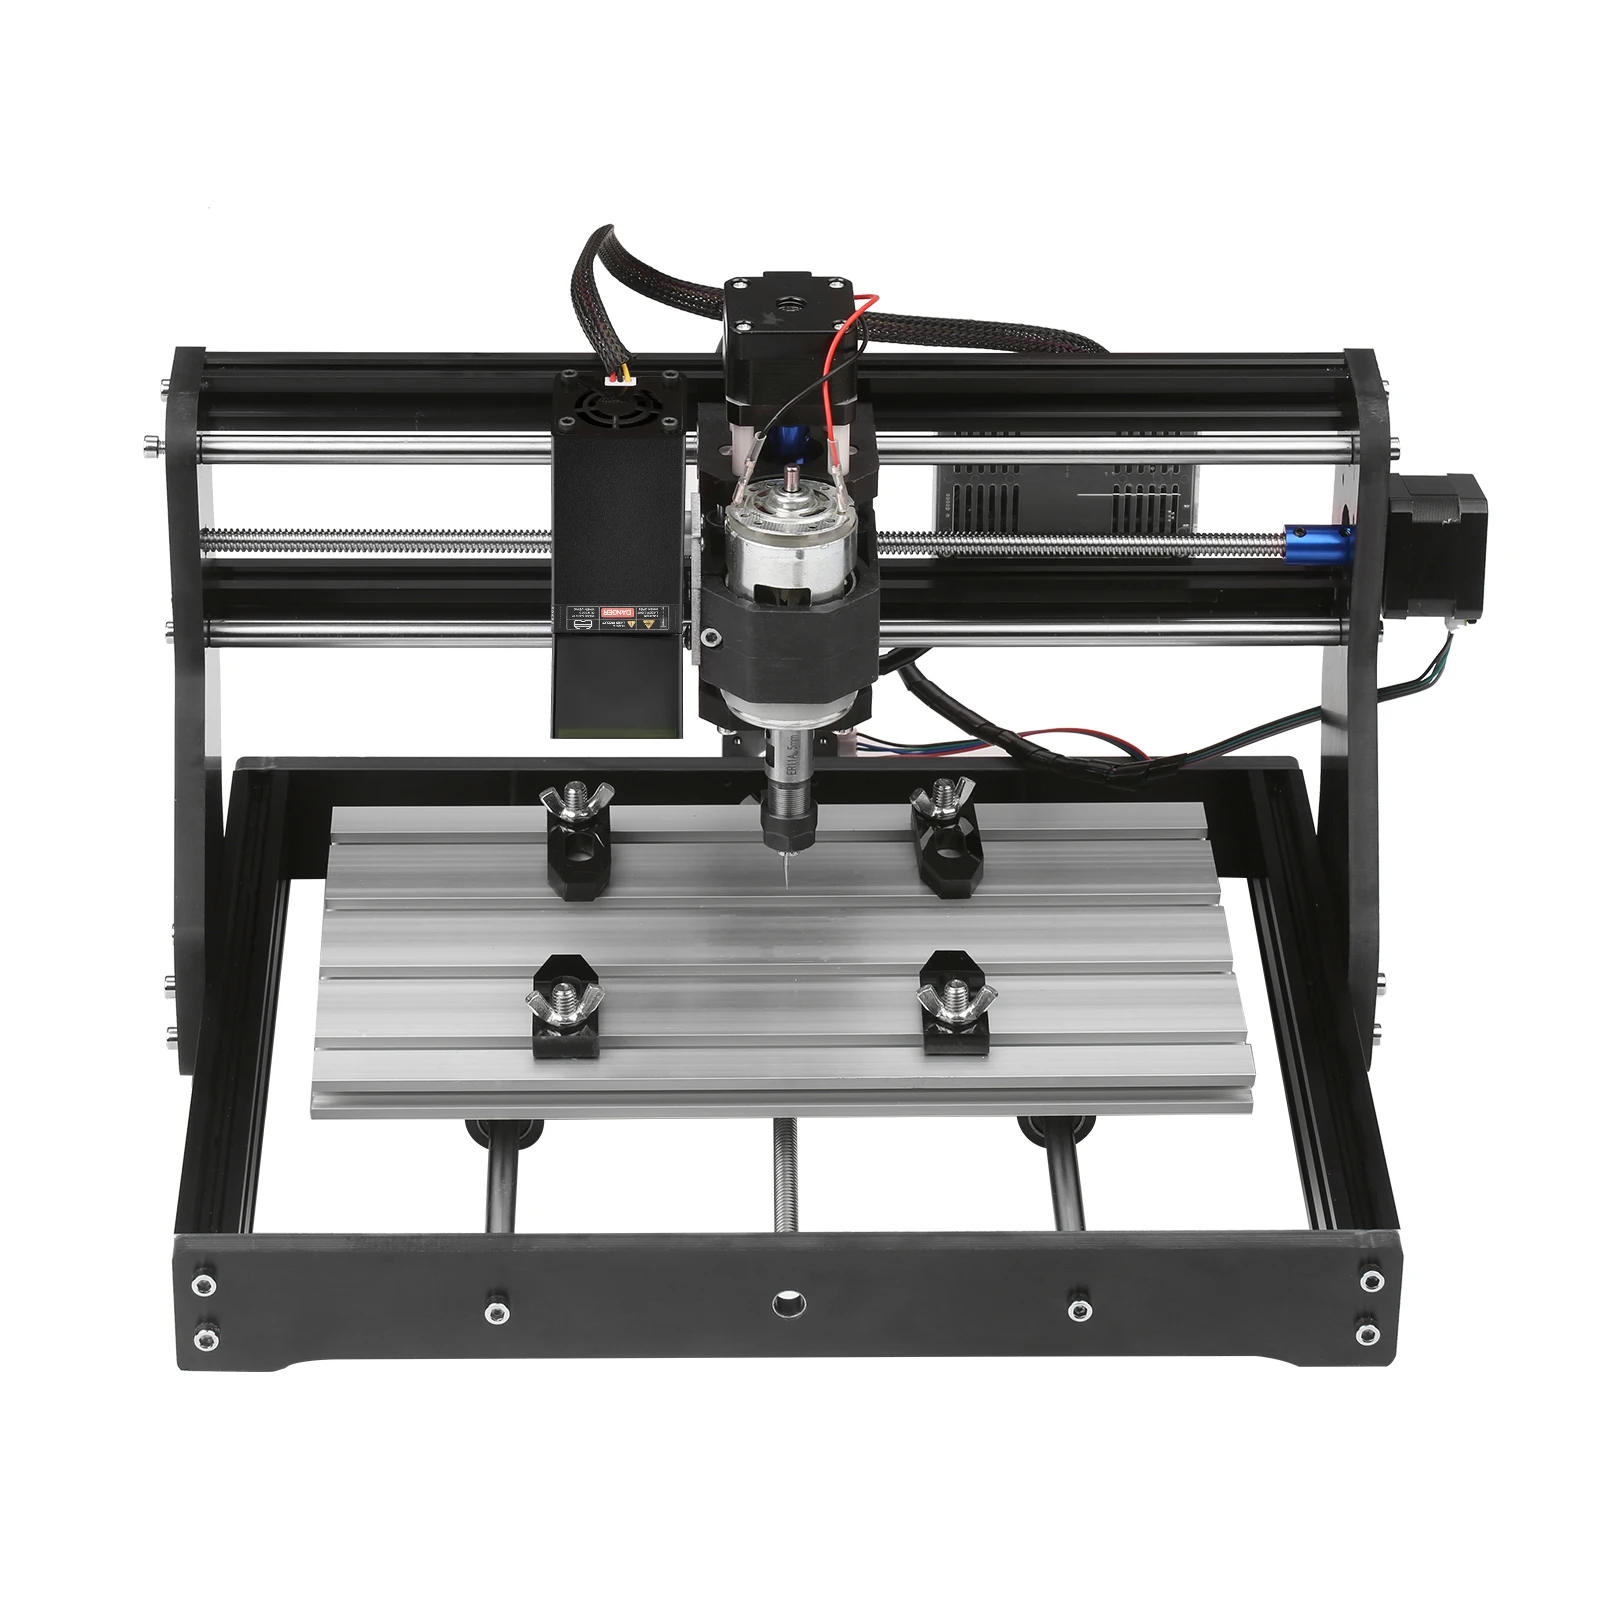 

CNC 3018 Router Kit GRBL Control 3 Axis with Offline Controller Acrylic PCB PVC Wood Carving Milling Engraving Machine Engraver